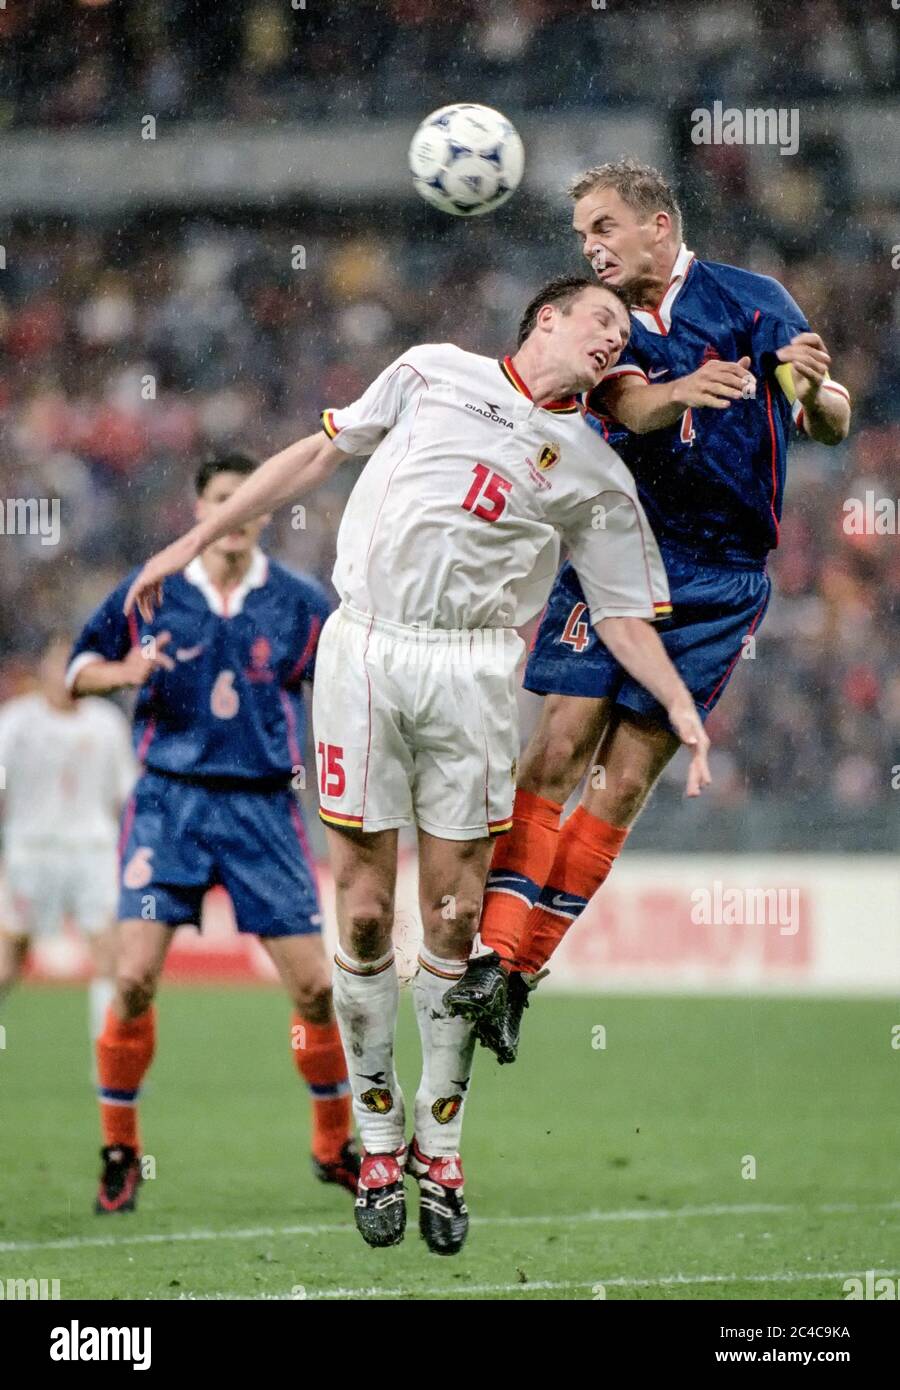 Frank DE BOER (4) of Holland heads away from Philippe CLEMENT (15) of Belgium during a match at the FIFA World Cup of 1998. Stock Photo